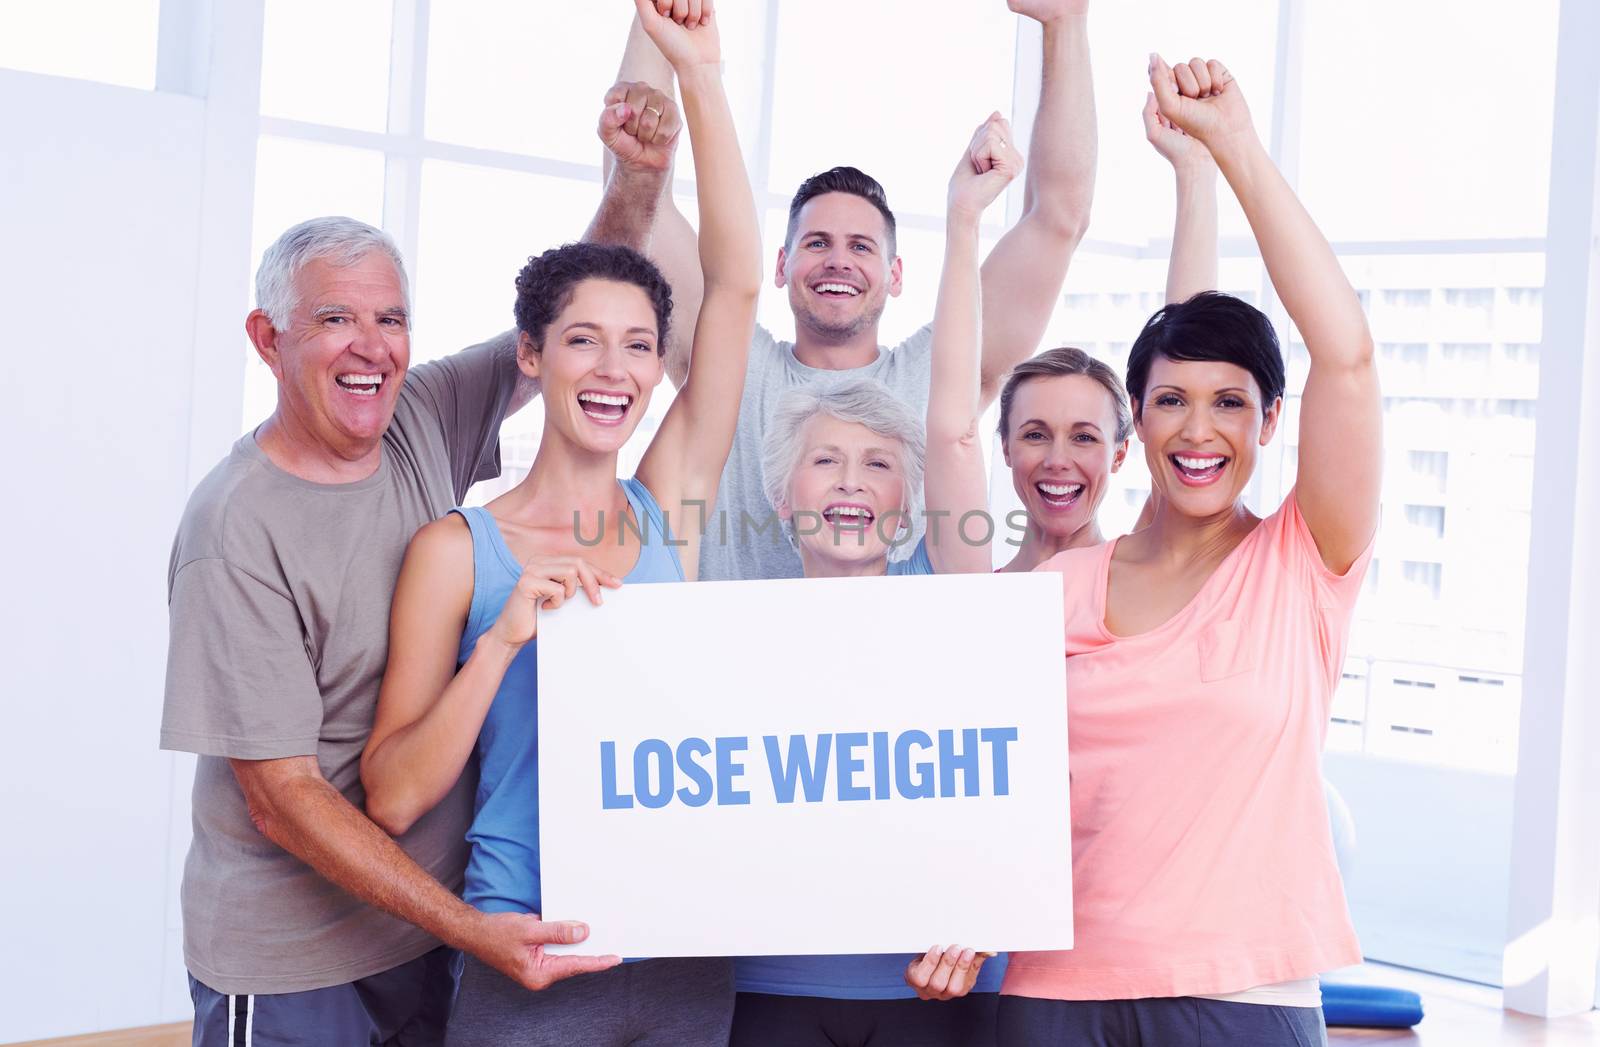 The word lose weight against portrait of happy fit people holding blank board